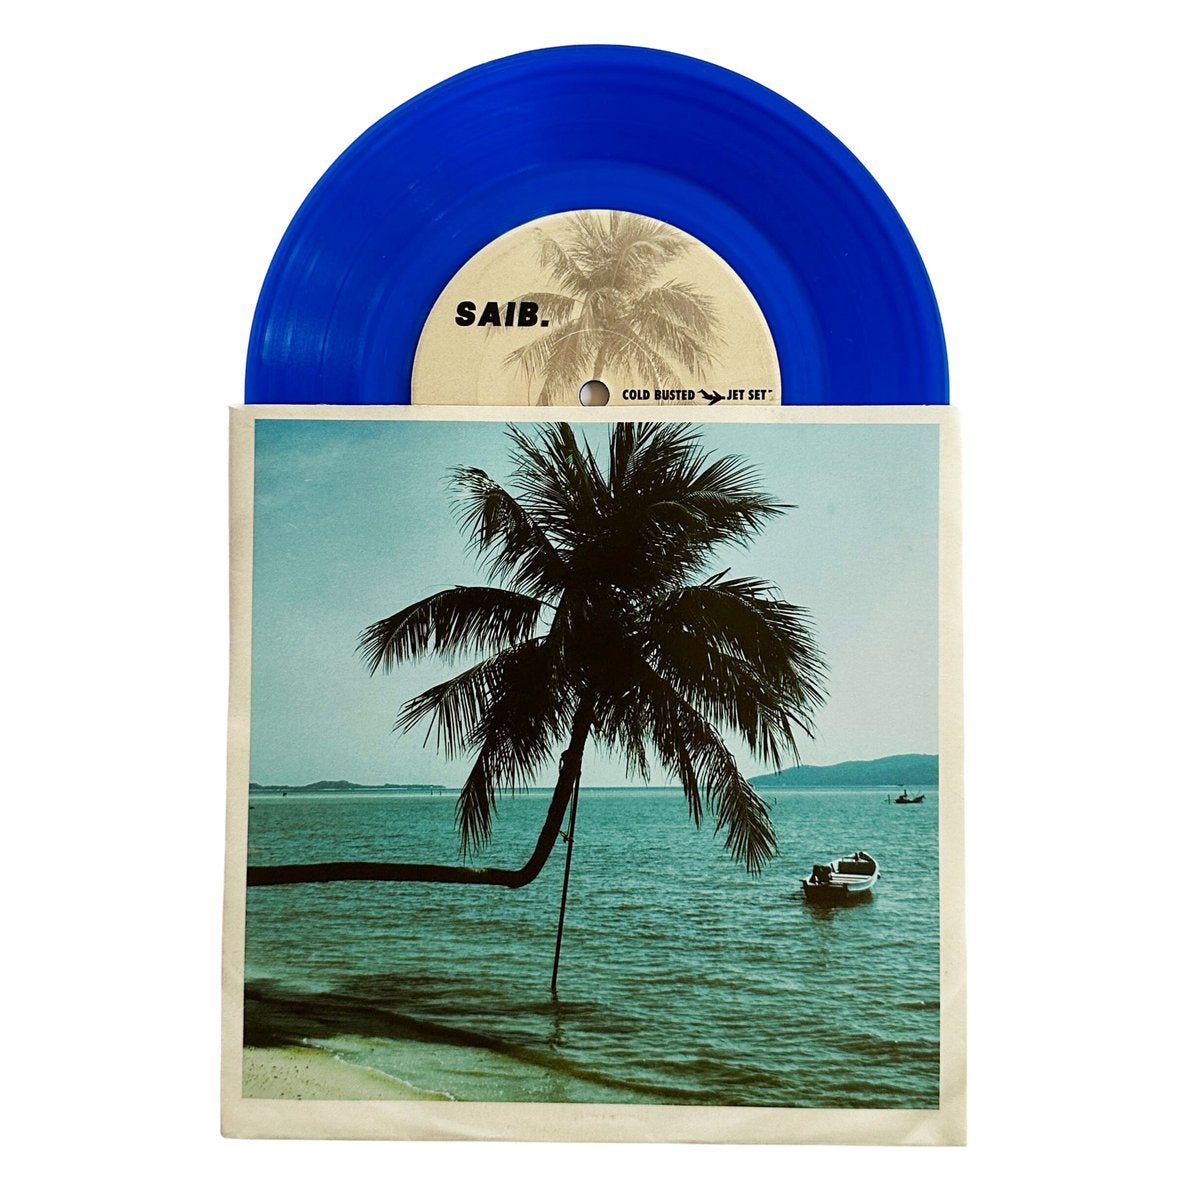 saib. - Jet Set - Limited Edition Transparent Blue Colored 7 Inch Vinyl - Cold Busted